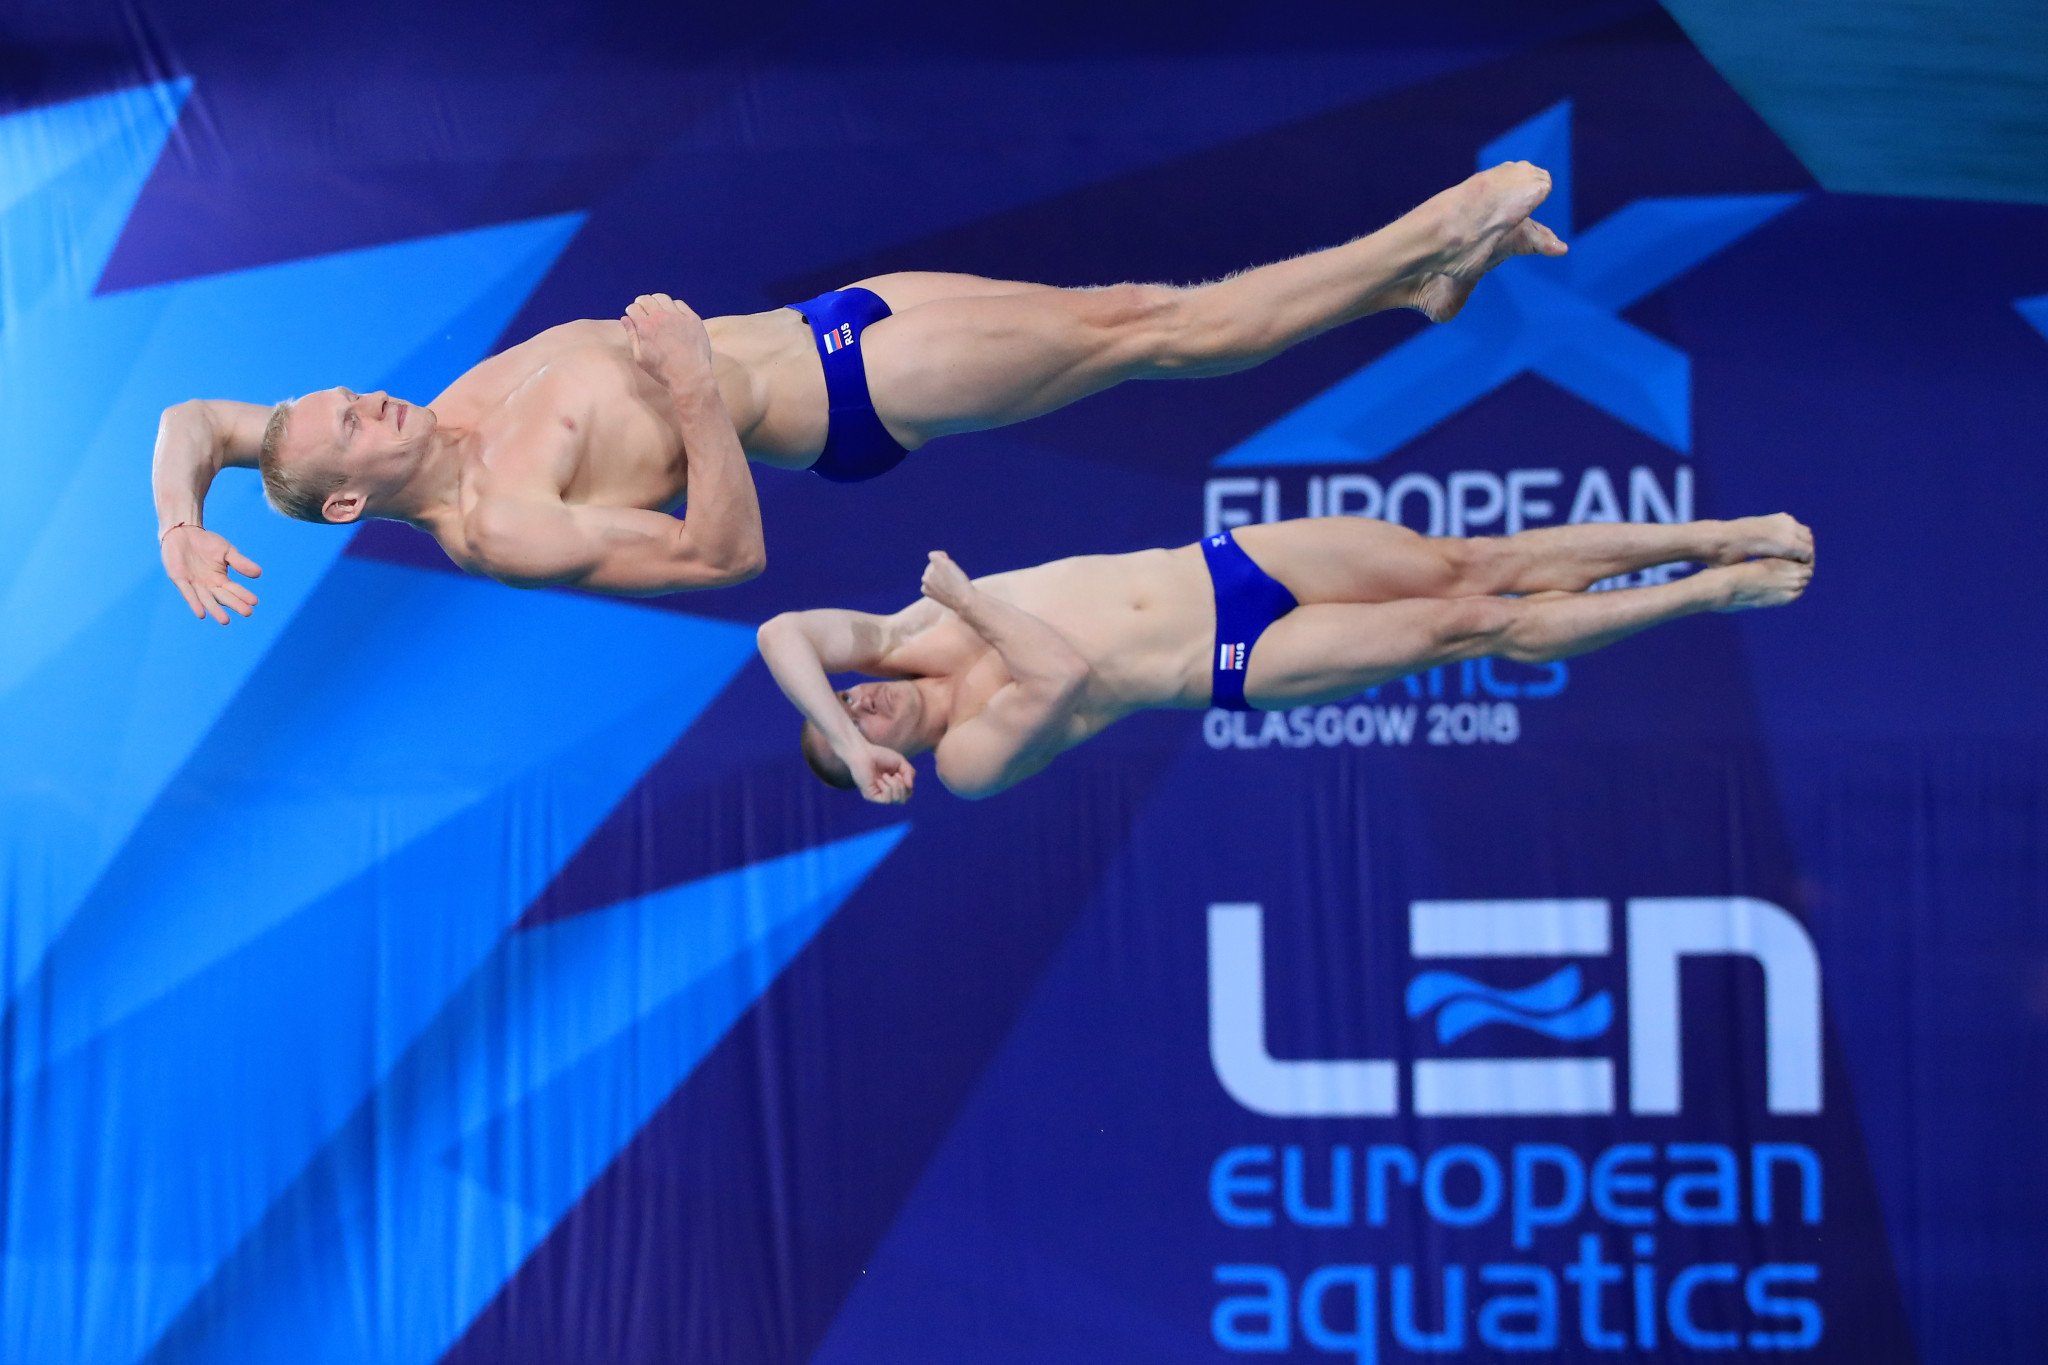 World champions clinch European Championships synchronised springboard title with final dive at Glasgow 2018